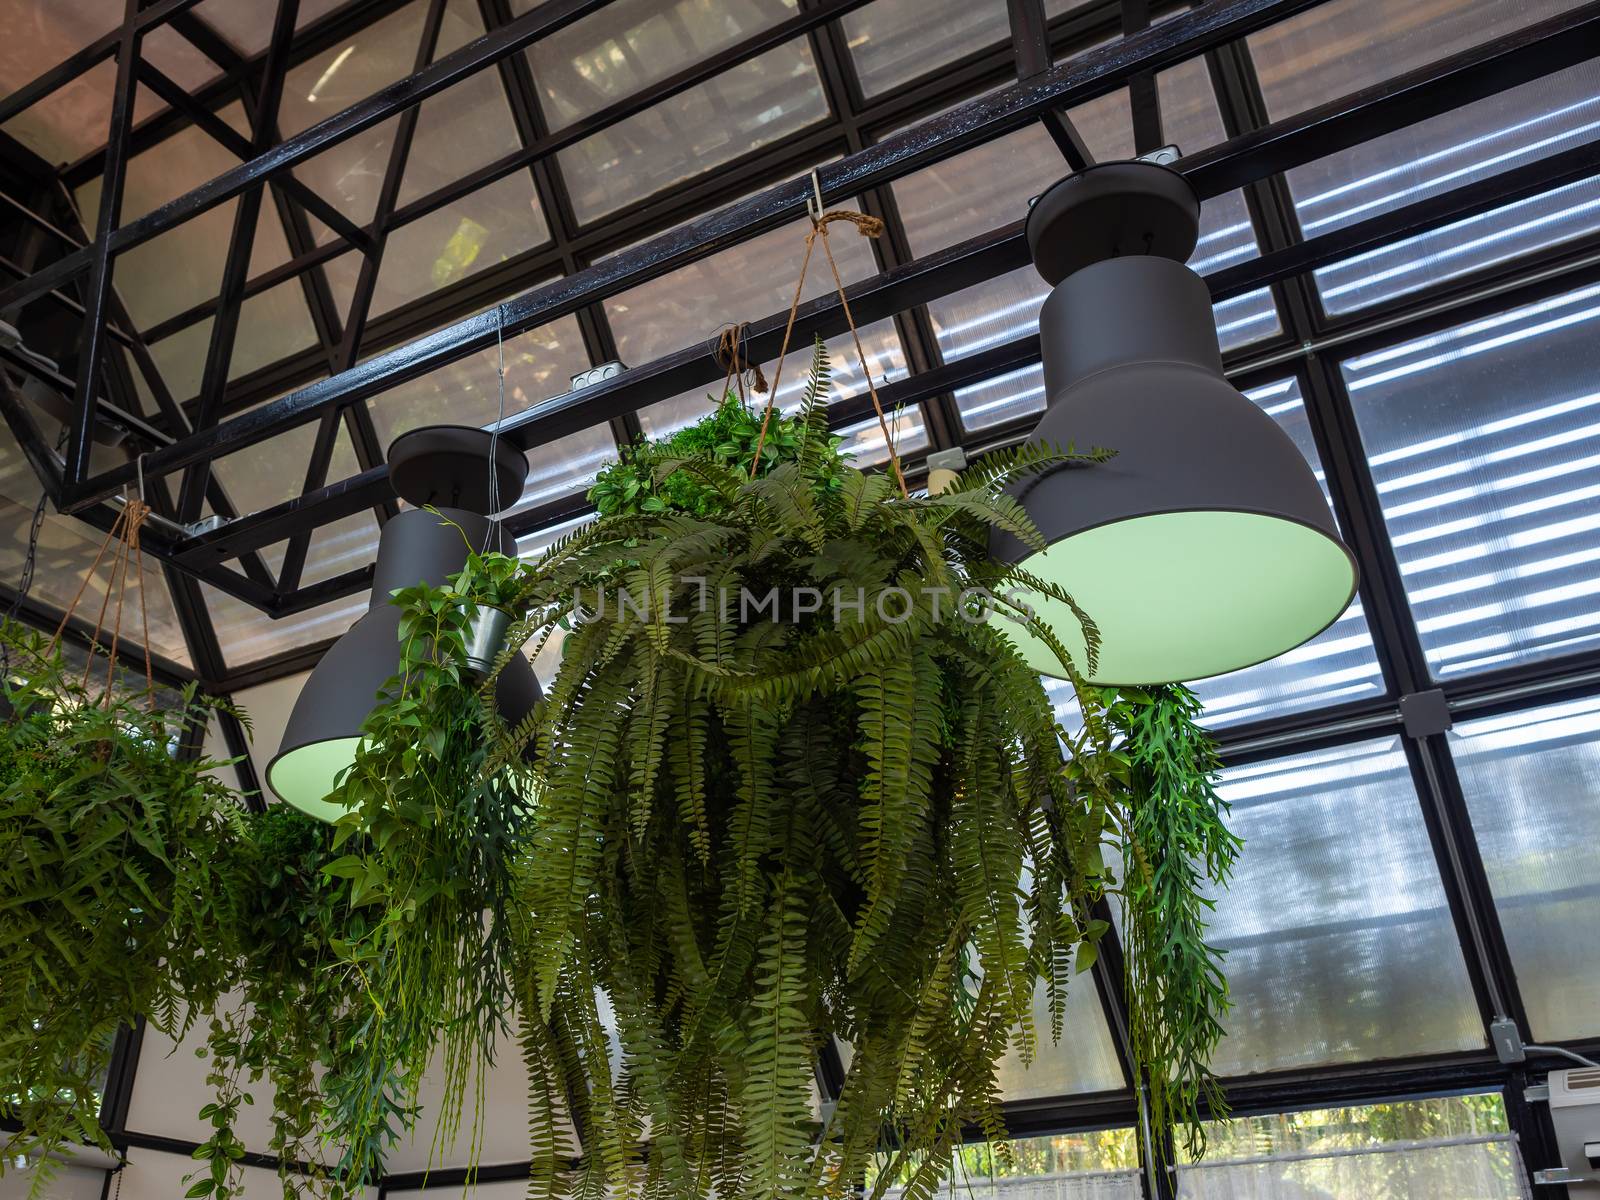 Green fern in hanging pot near the ceiling light decoration in cafe.